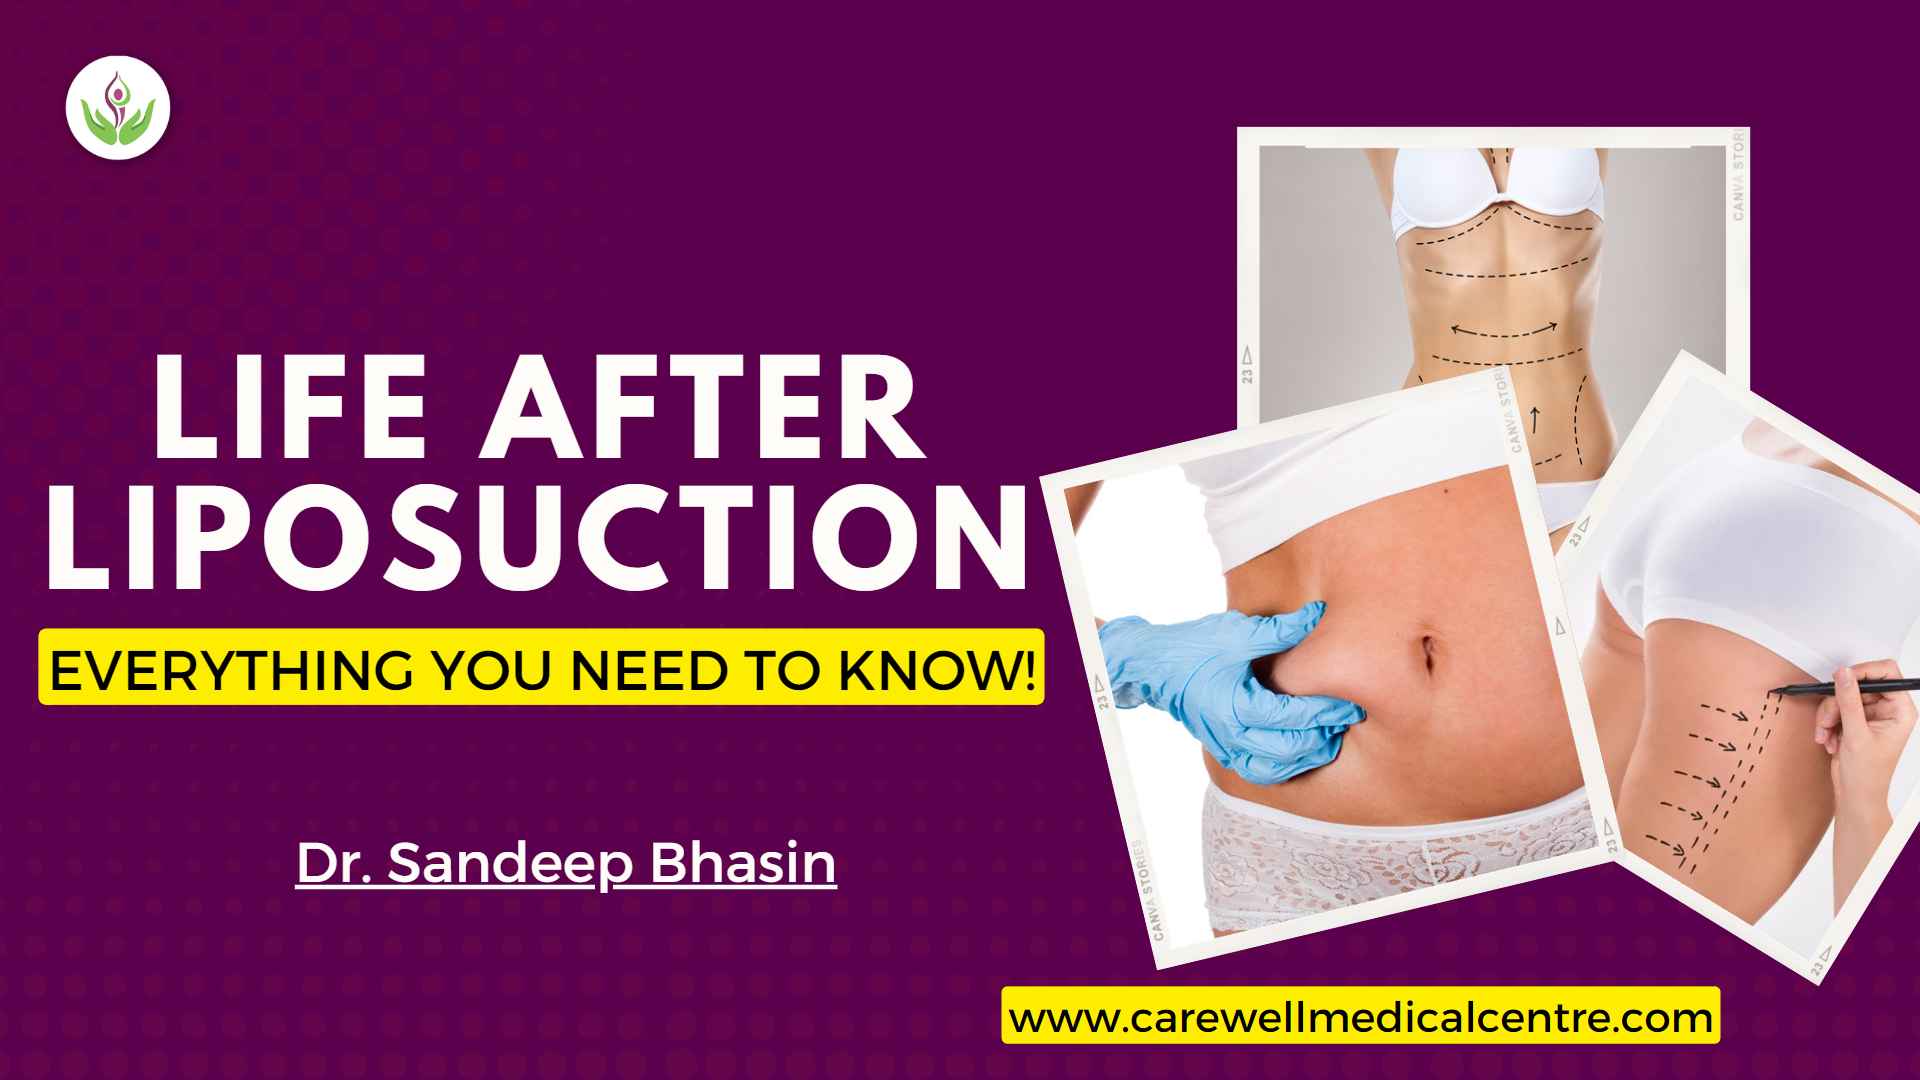 Benefits of Wearing Compression Garments after Liposuction, Liposuction in  Delhi